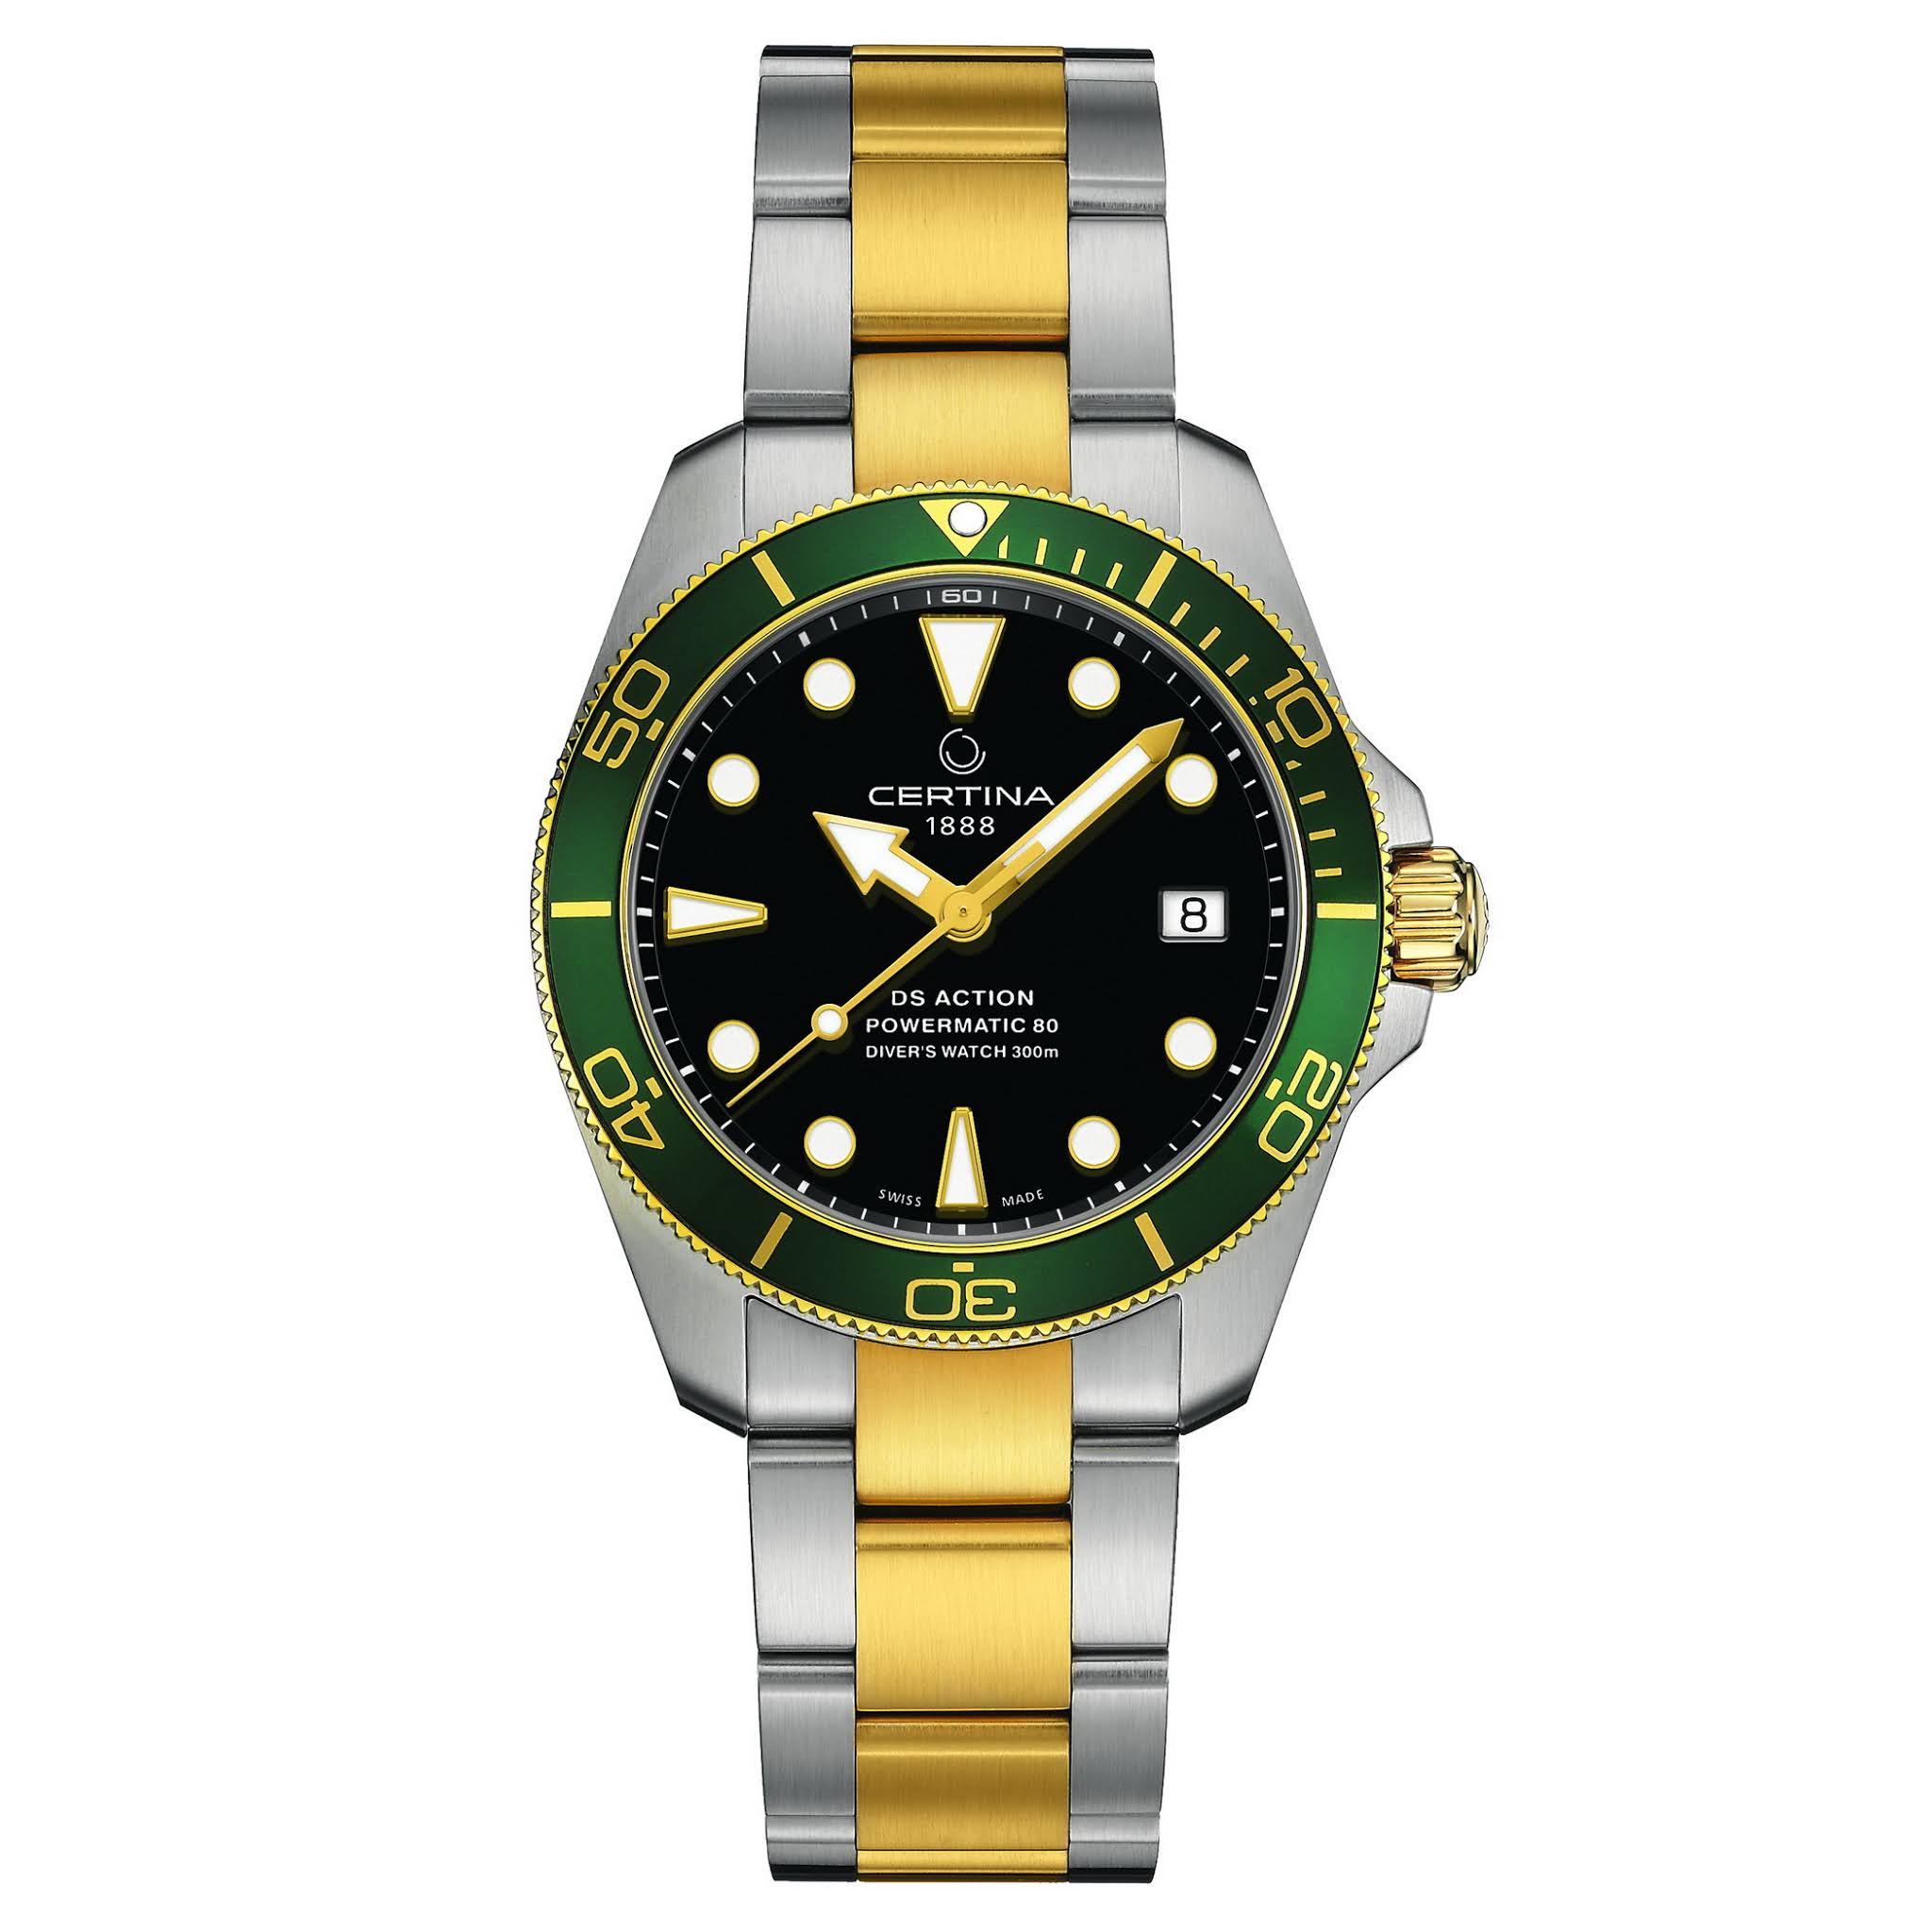 Certina's new DS Action Diver 38mm CERTINA%2BDS%2BAction%2BDiver%2B38mm%2B03